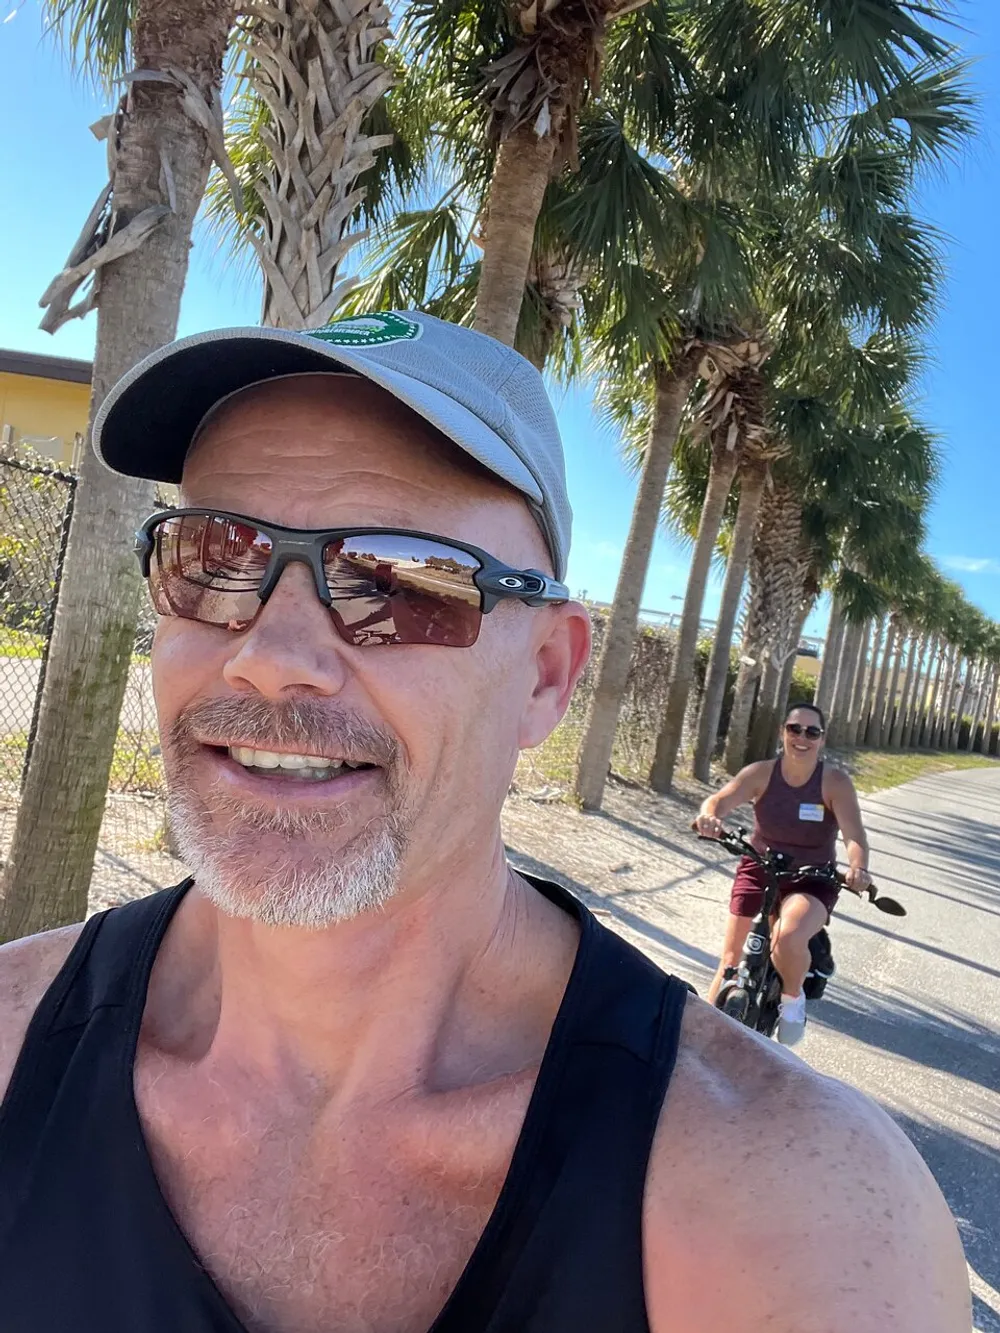 A person is taking a selfie with another individual riding a bike in the background both enjoying a sunny day outdoors lined with palm trees